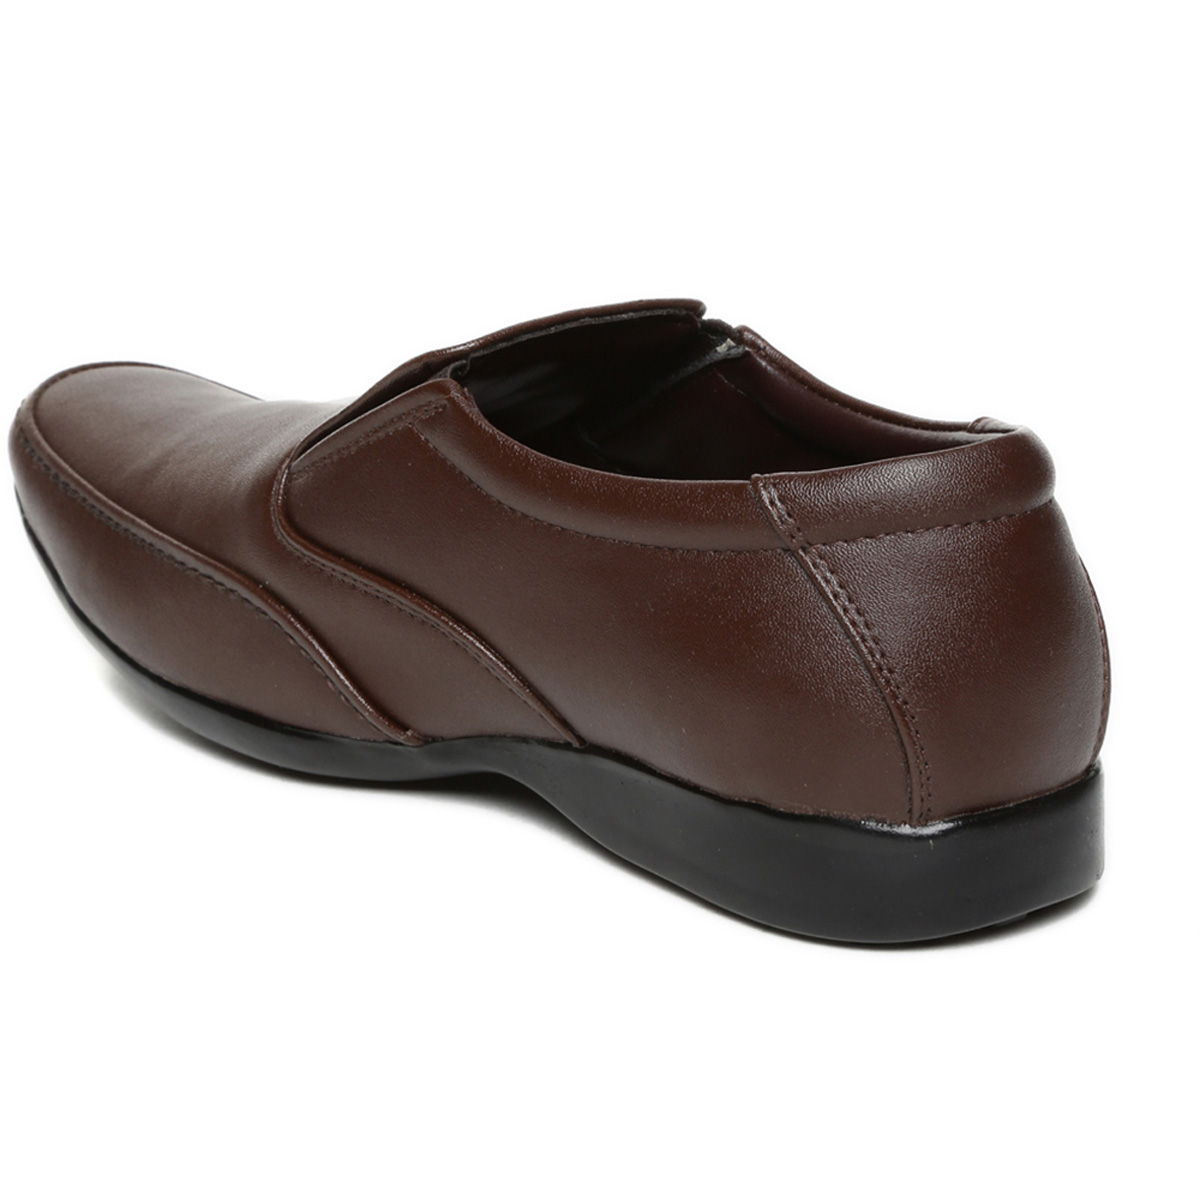 Buy Paragon Men'S Brown Slip On Formal Shoes Online @ ₹656 from ShopClues